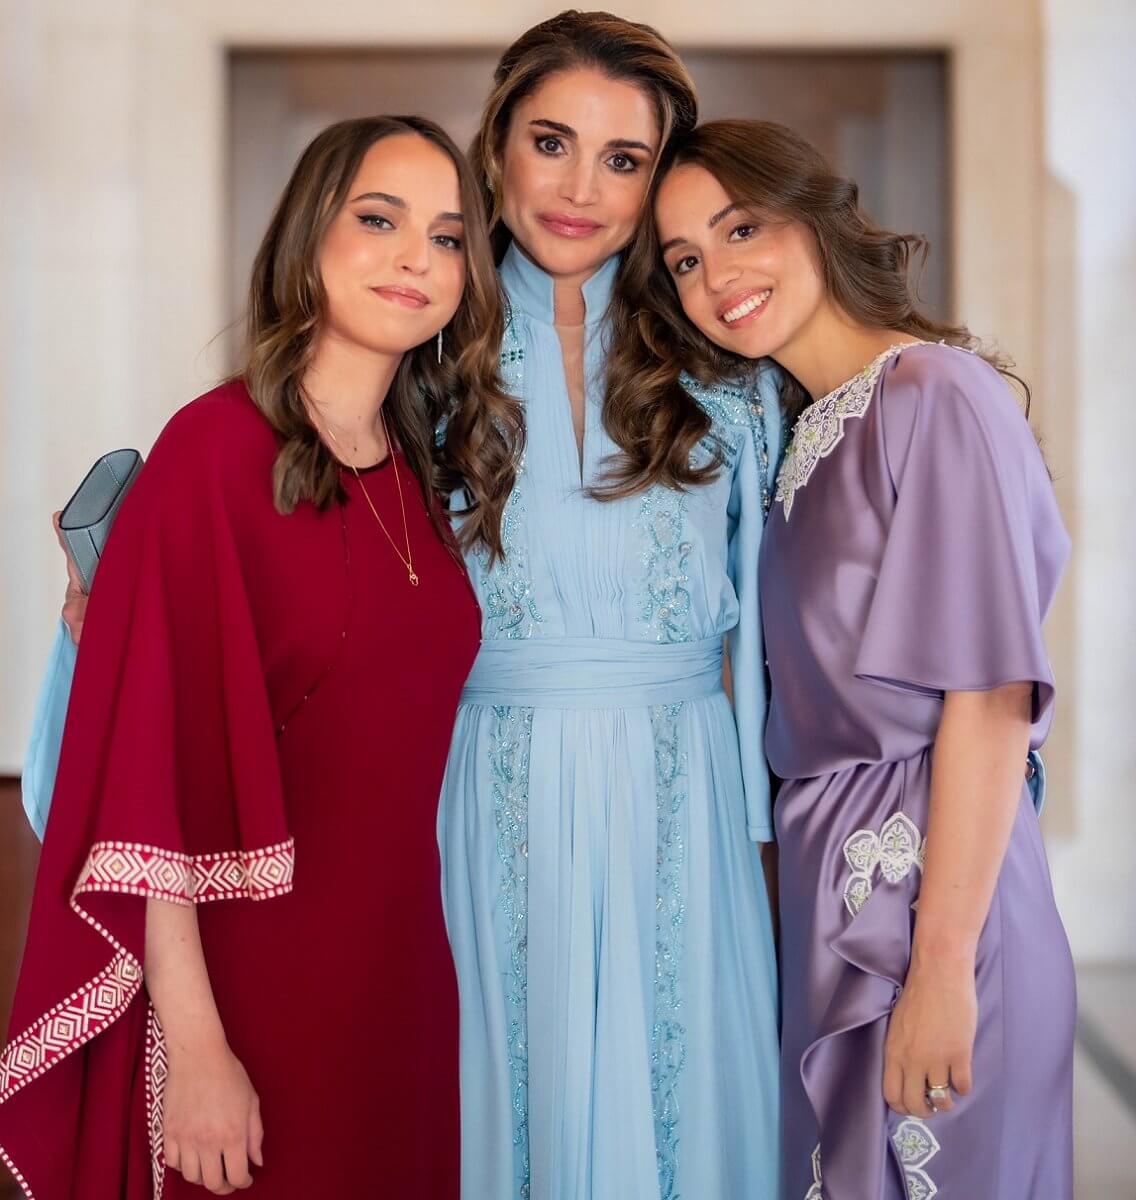 Queen Rania congratulated her daughters upon their birthday